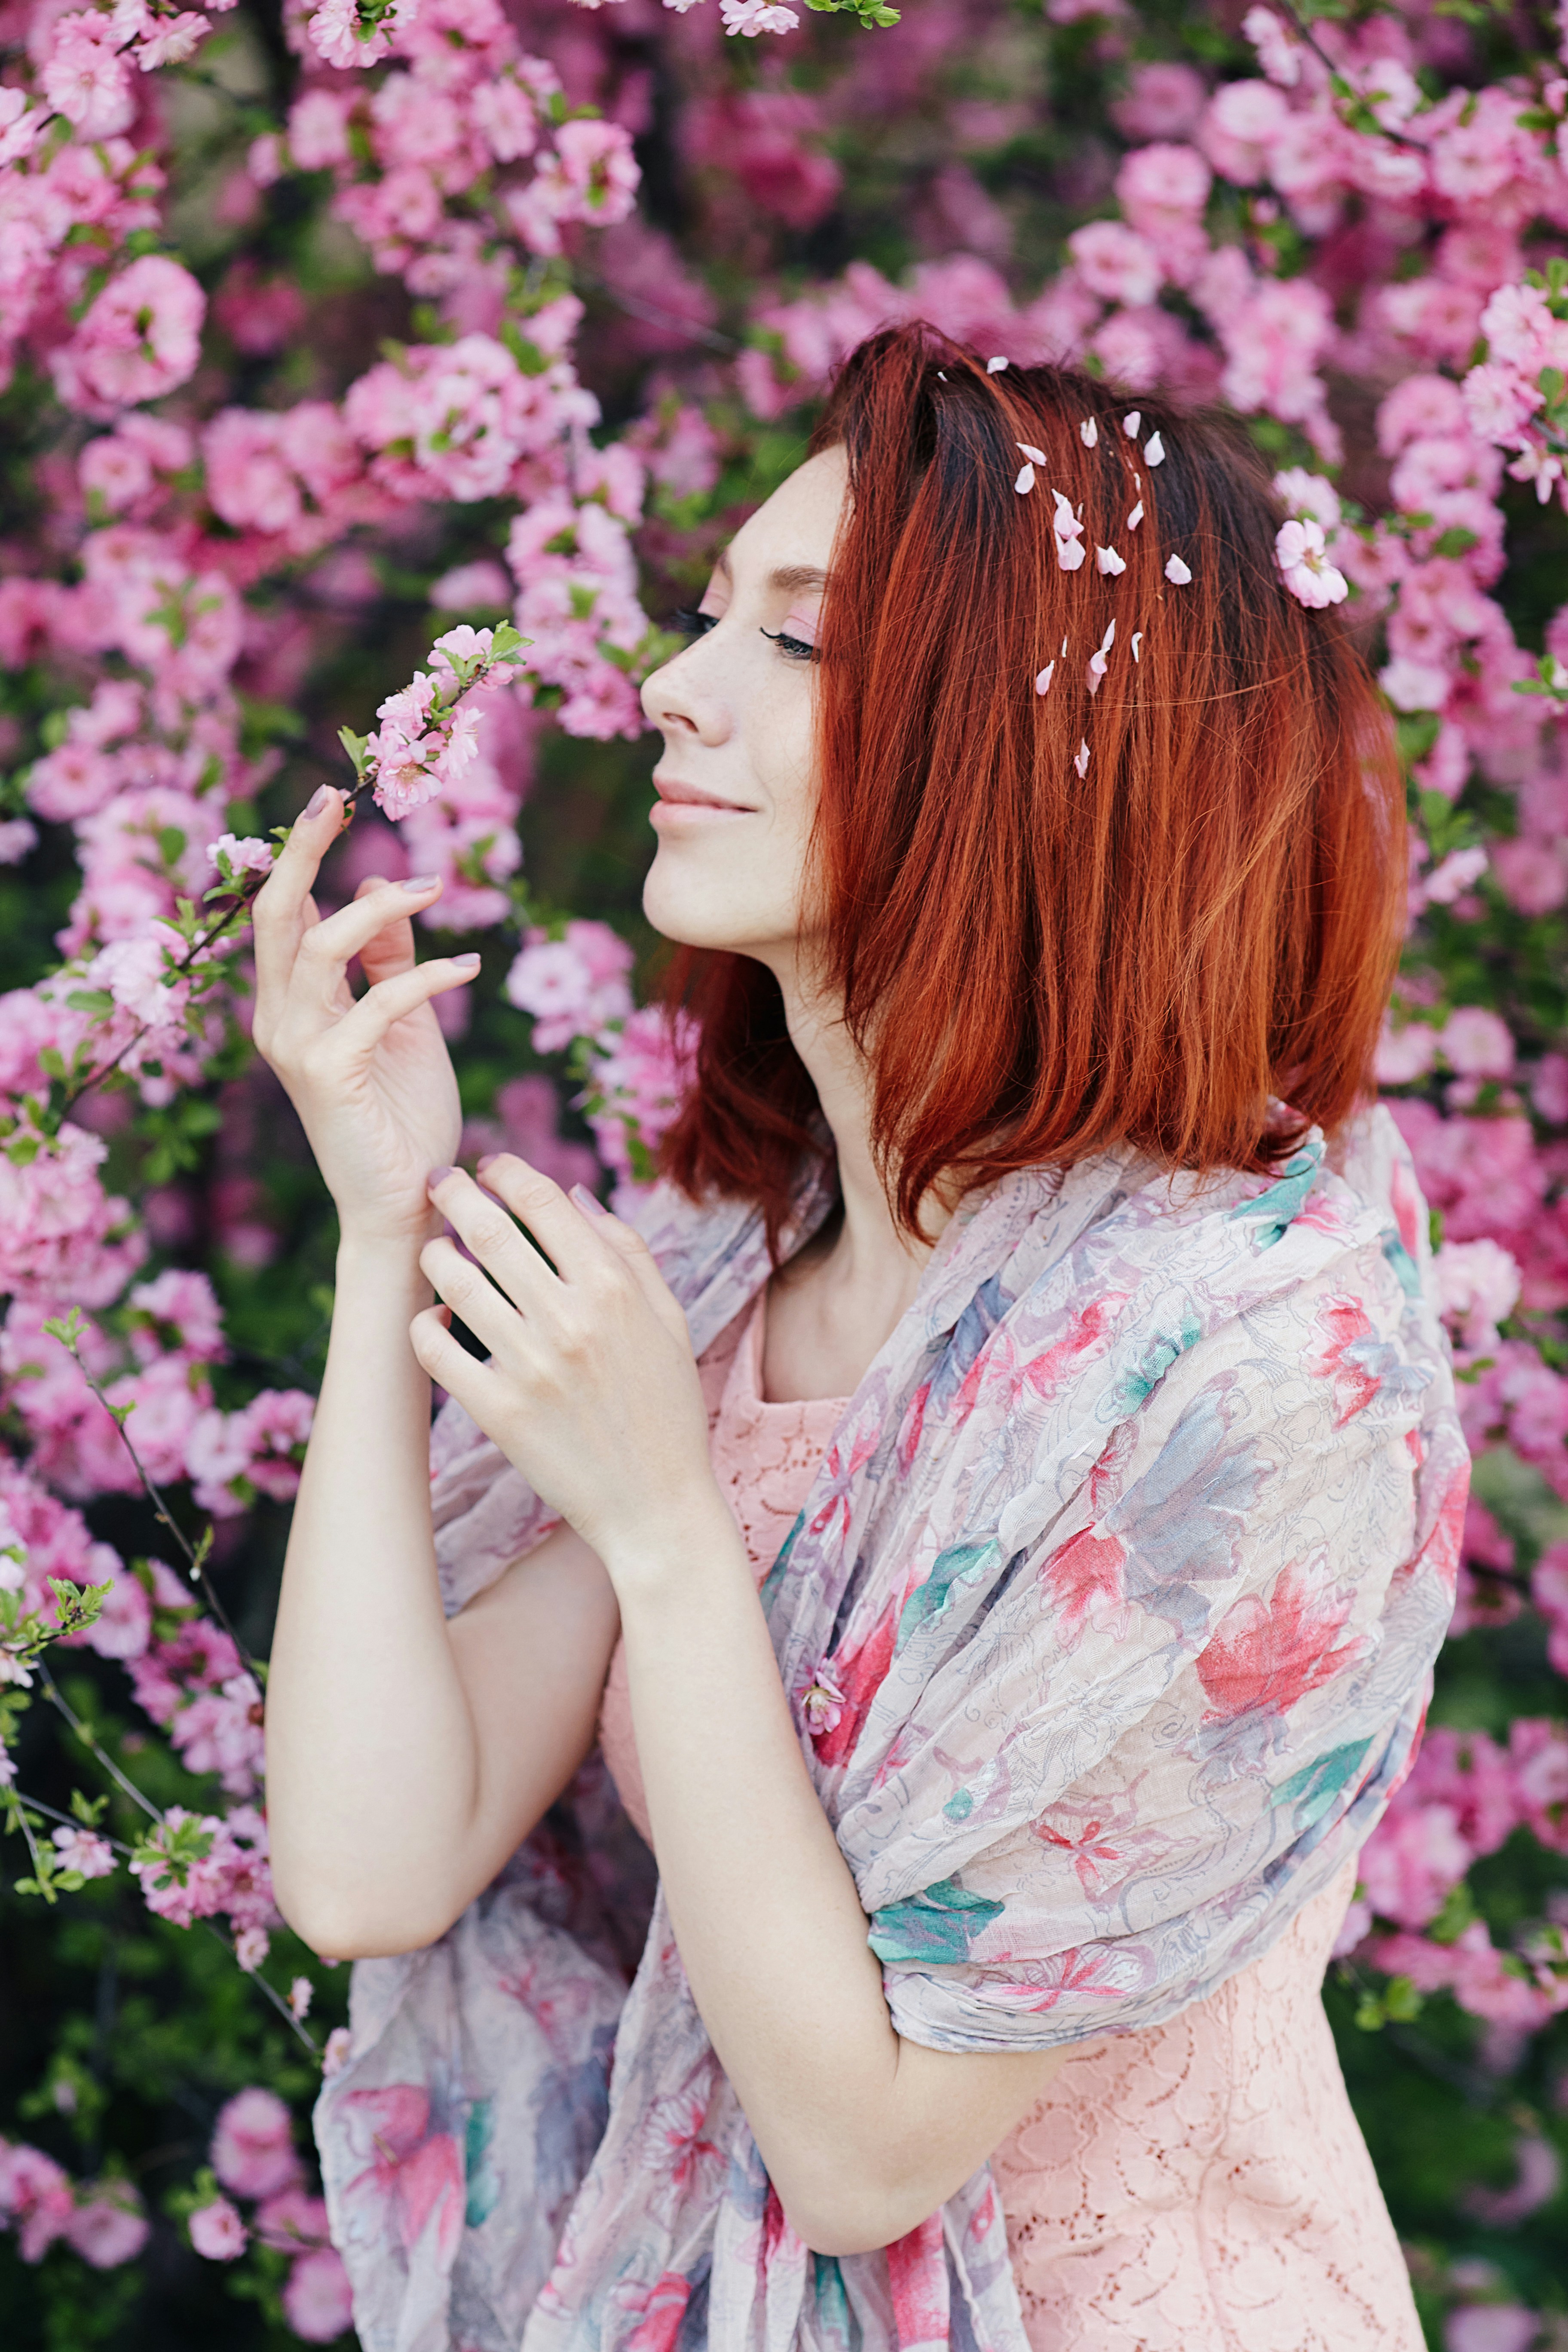 Portrait of a fair-haired girl in a blooming garden. The young woman's short, fiery hair is covered in flower petals. A delicate spring portrait for the website and social networks. Автор - фотограф Олег Мороз (Tengyart)